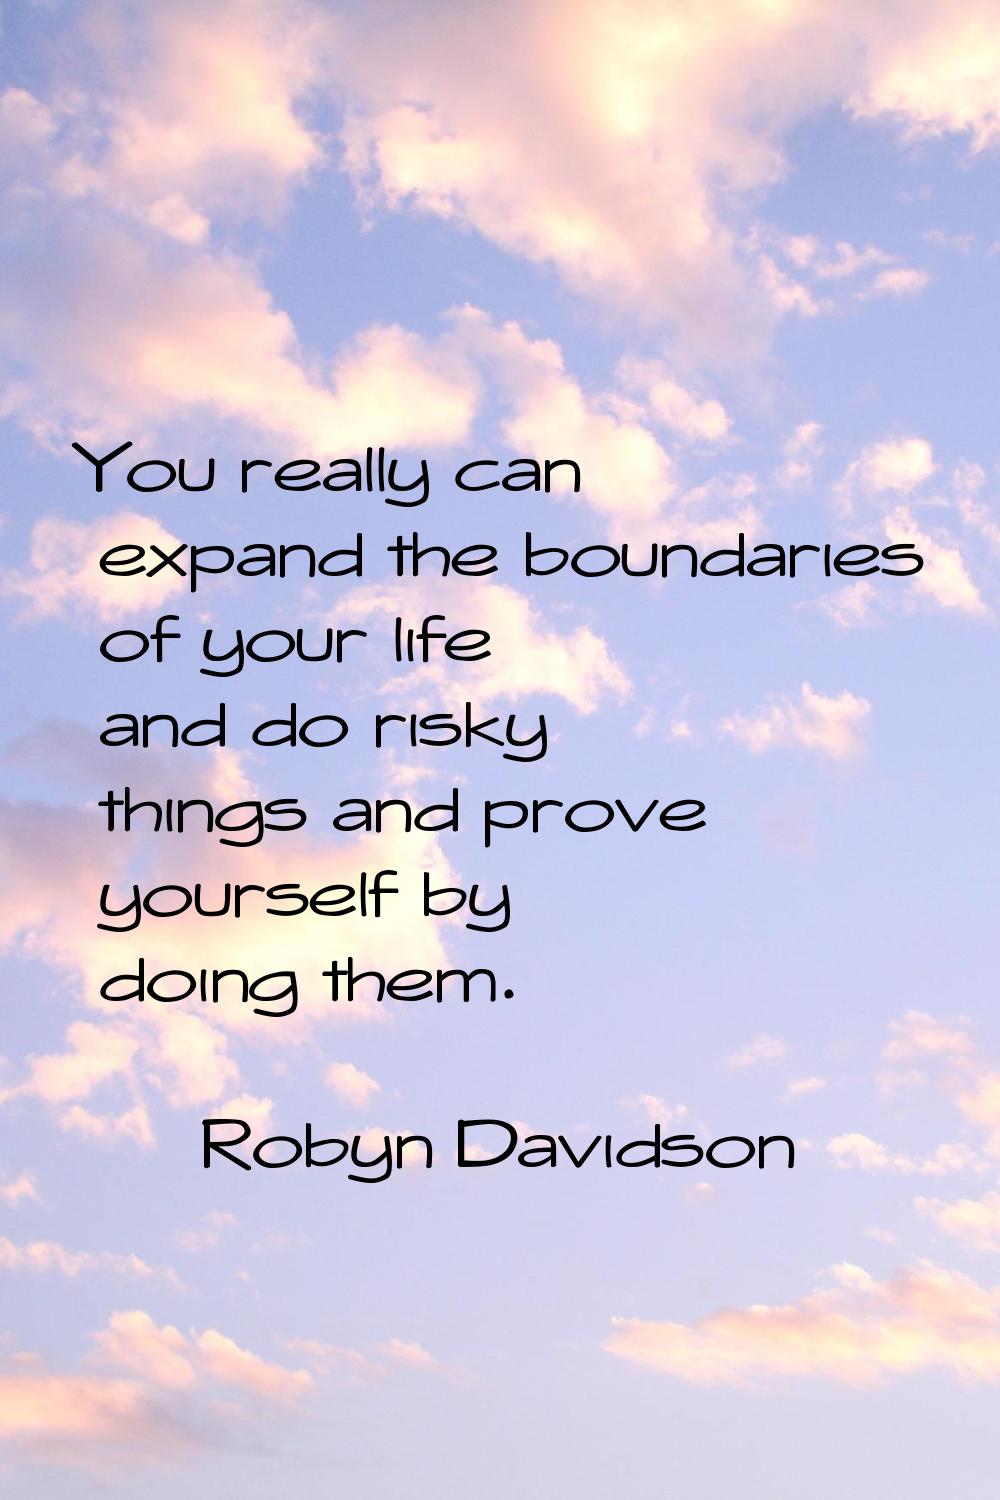 You really can expand the boundaries of your life and do risky things and prove yourself by doing t